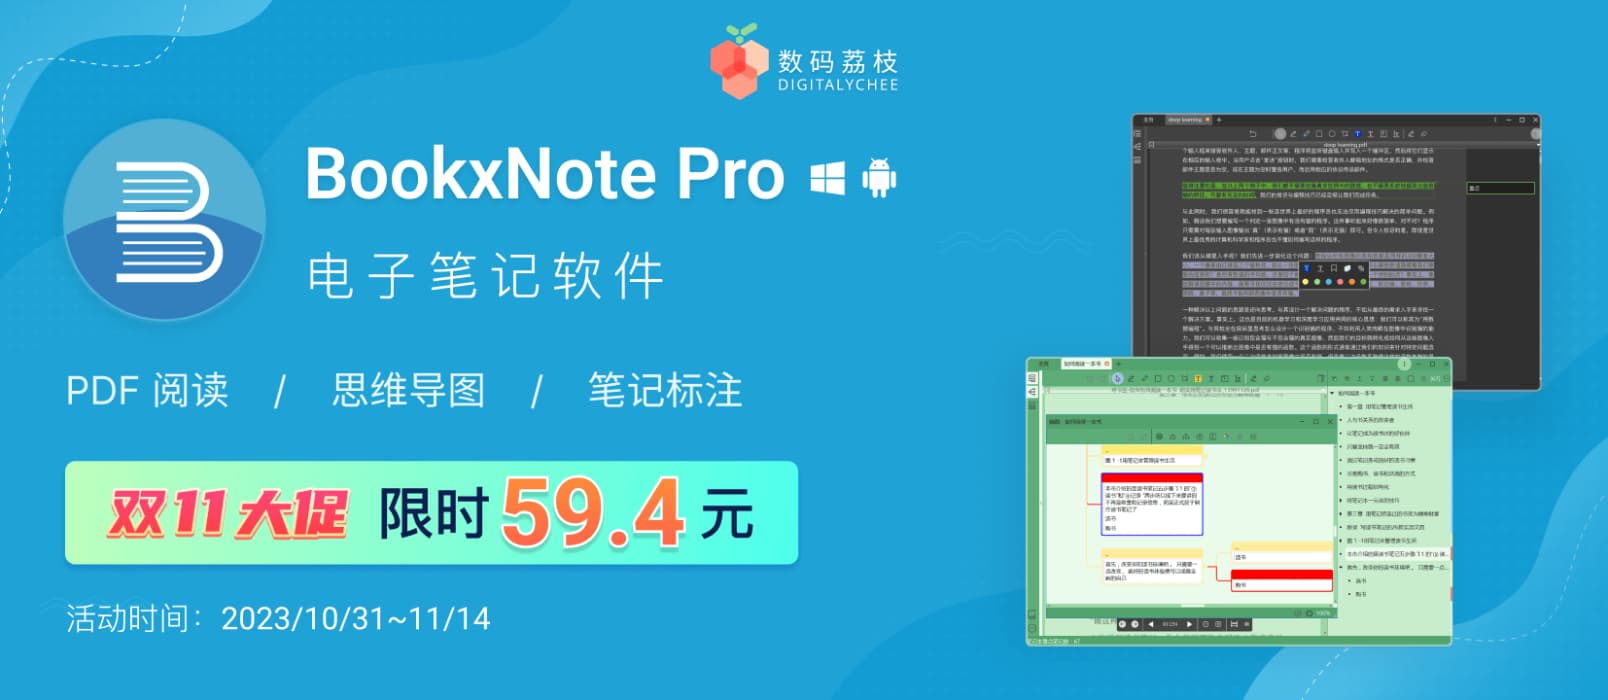 BookxNote Pro - 电子书学习软件：划重点做笔记，导出脑图[Windows/Android] 2